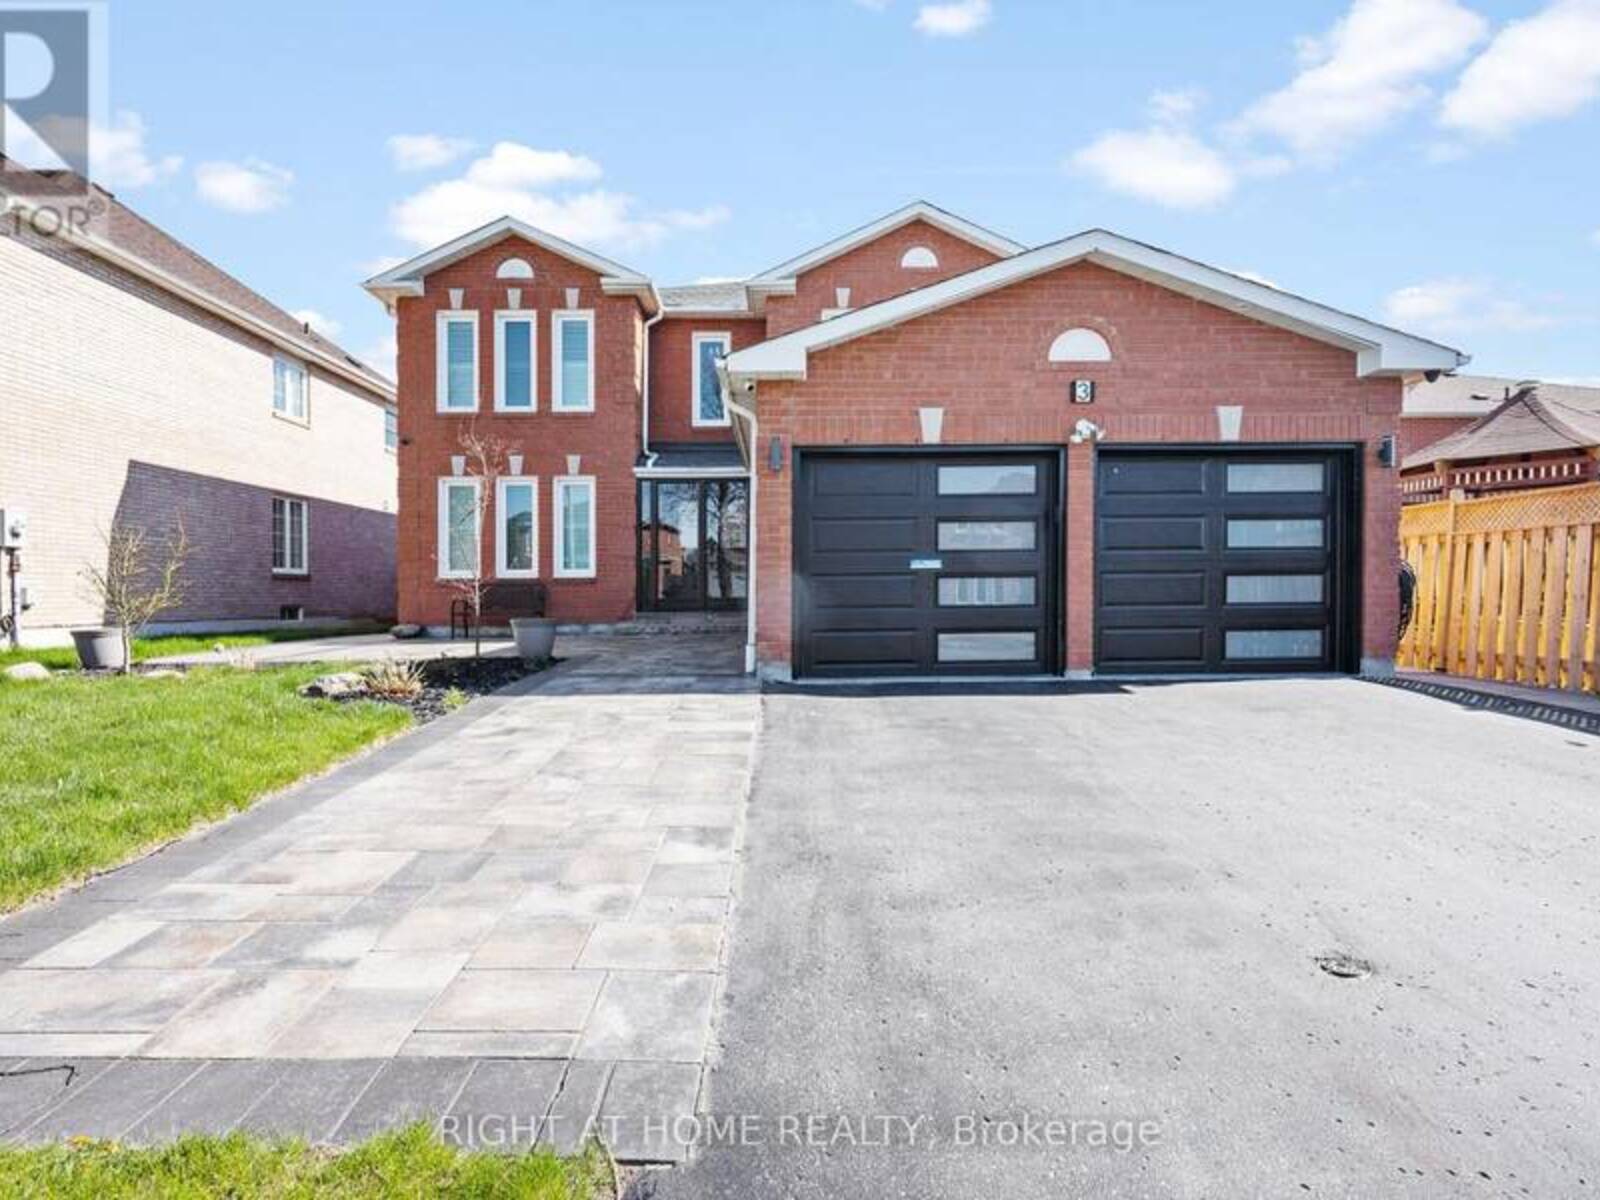 3 DONALD WILSON ST, Whitby, Ontario L1R 2H5